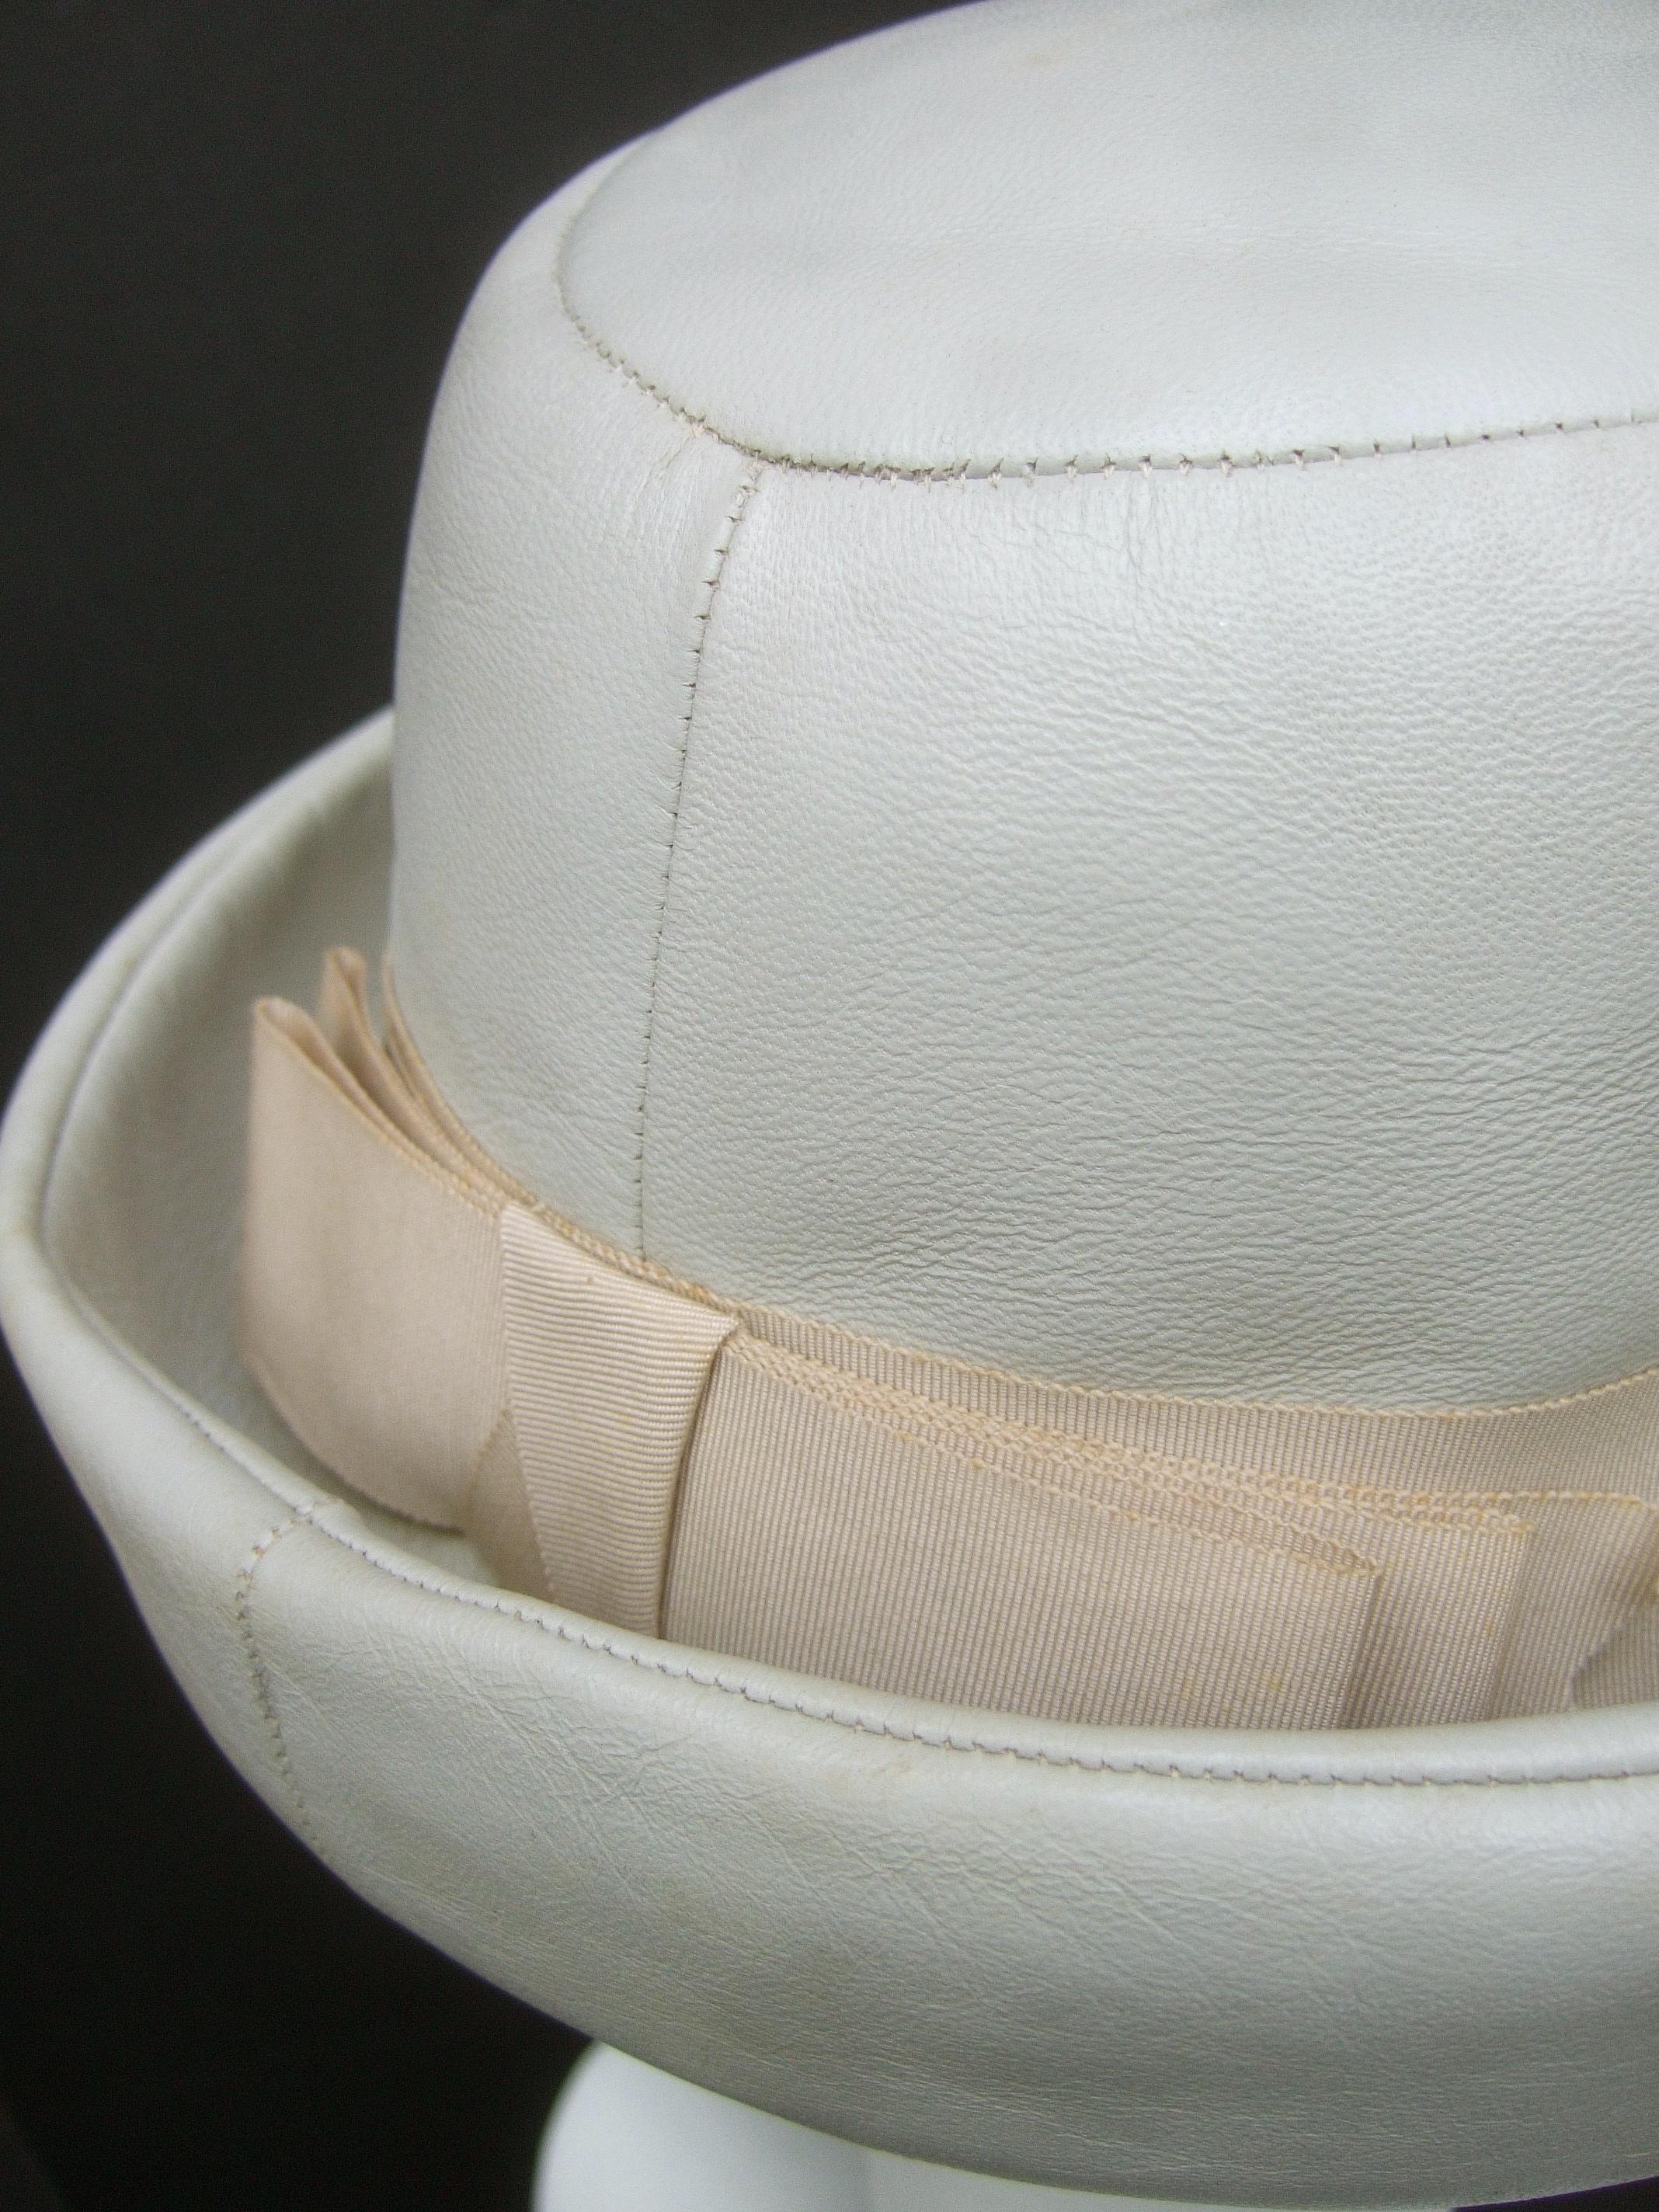 Yves Saint Laurent Chic Mod Leather Hat Circa 1970 For Sale 6